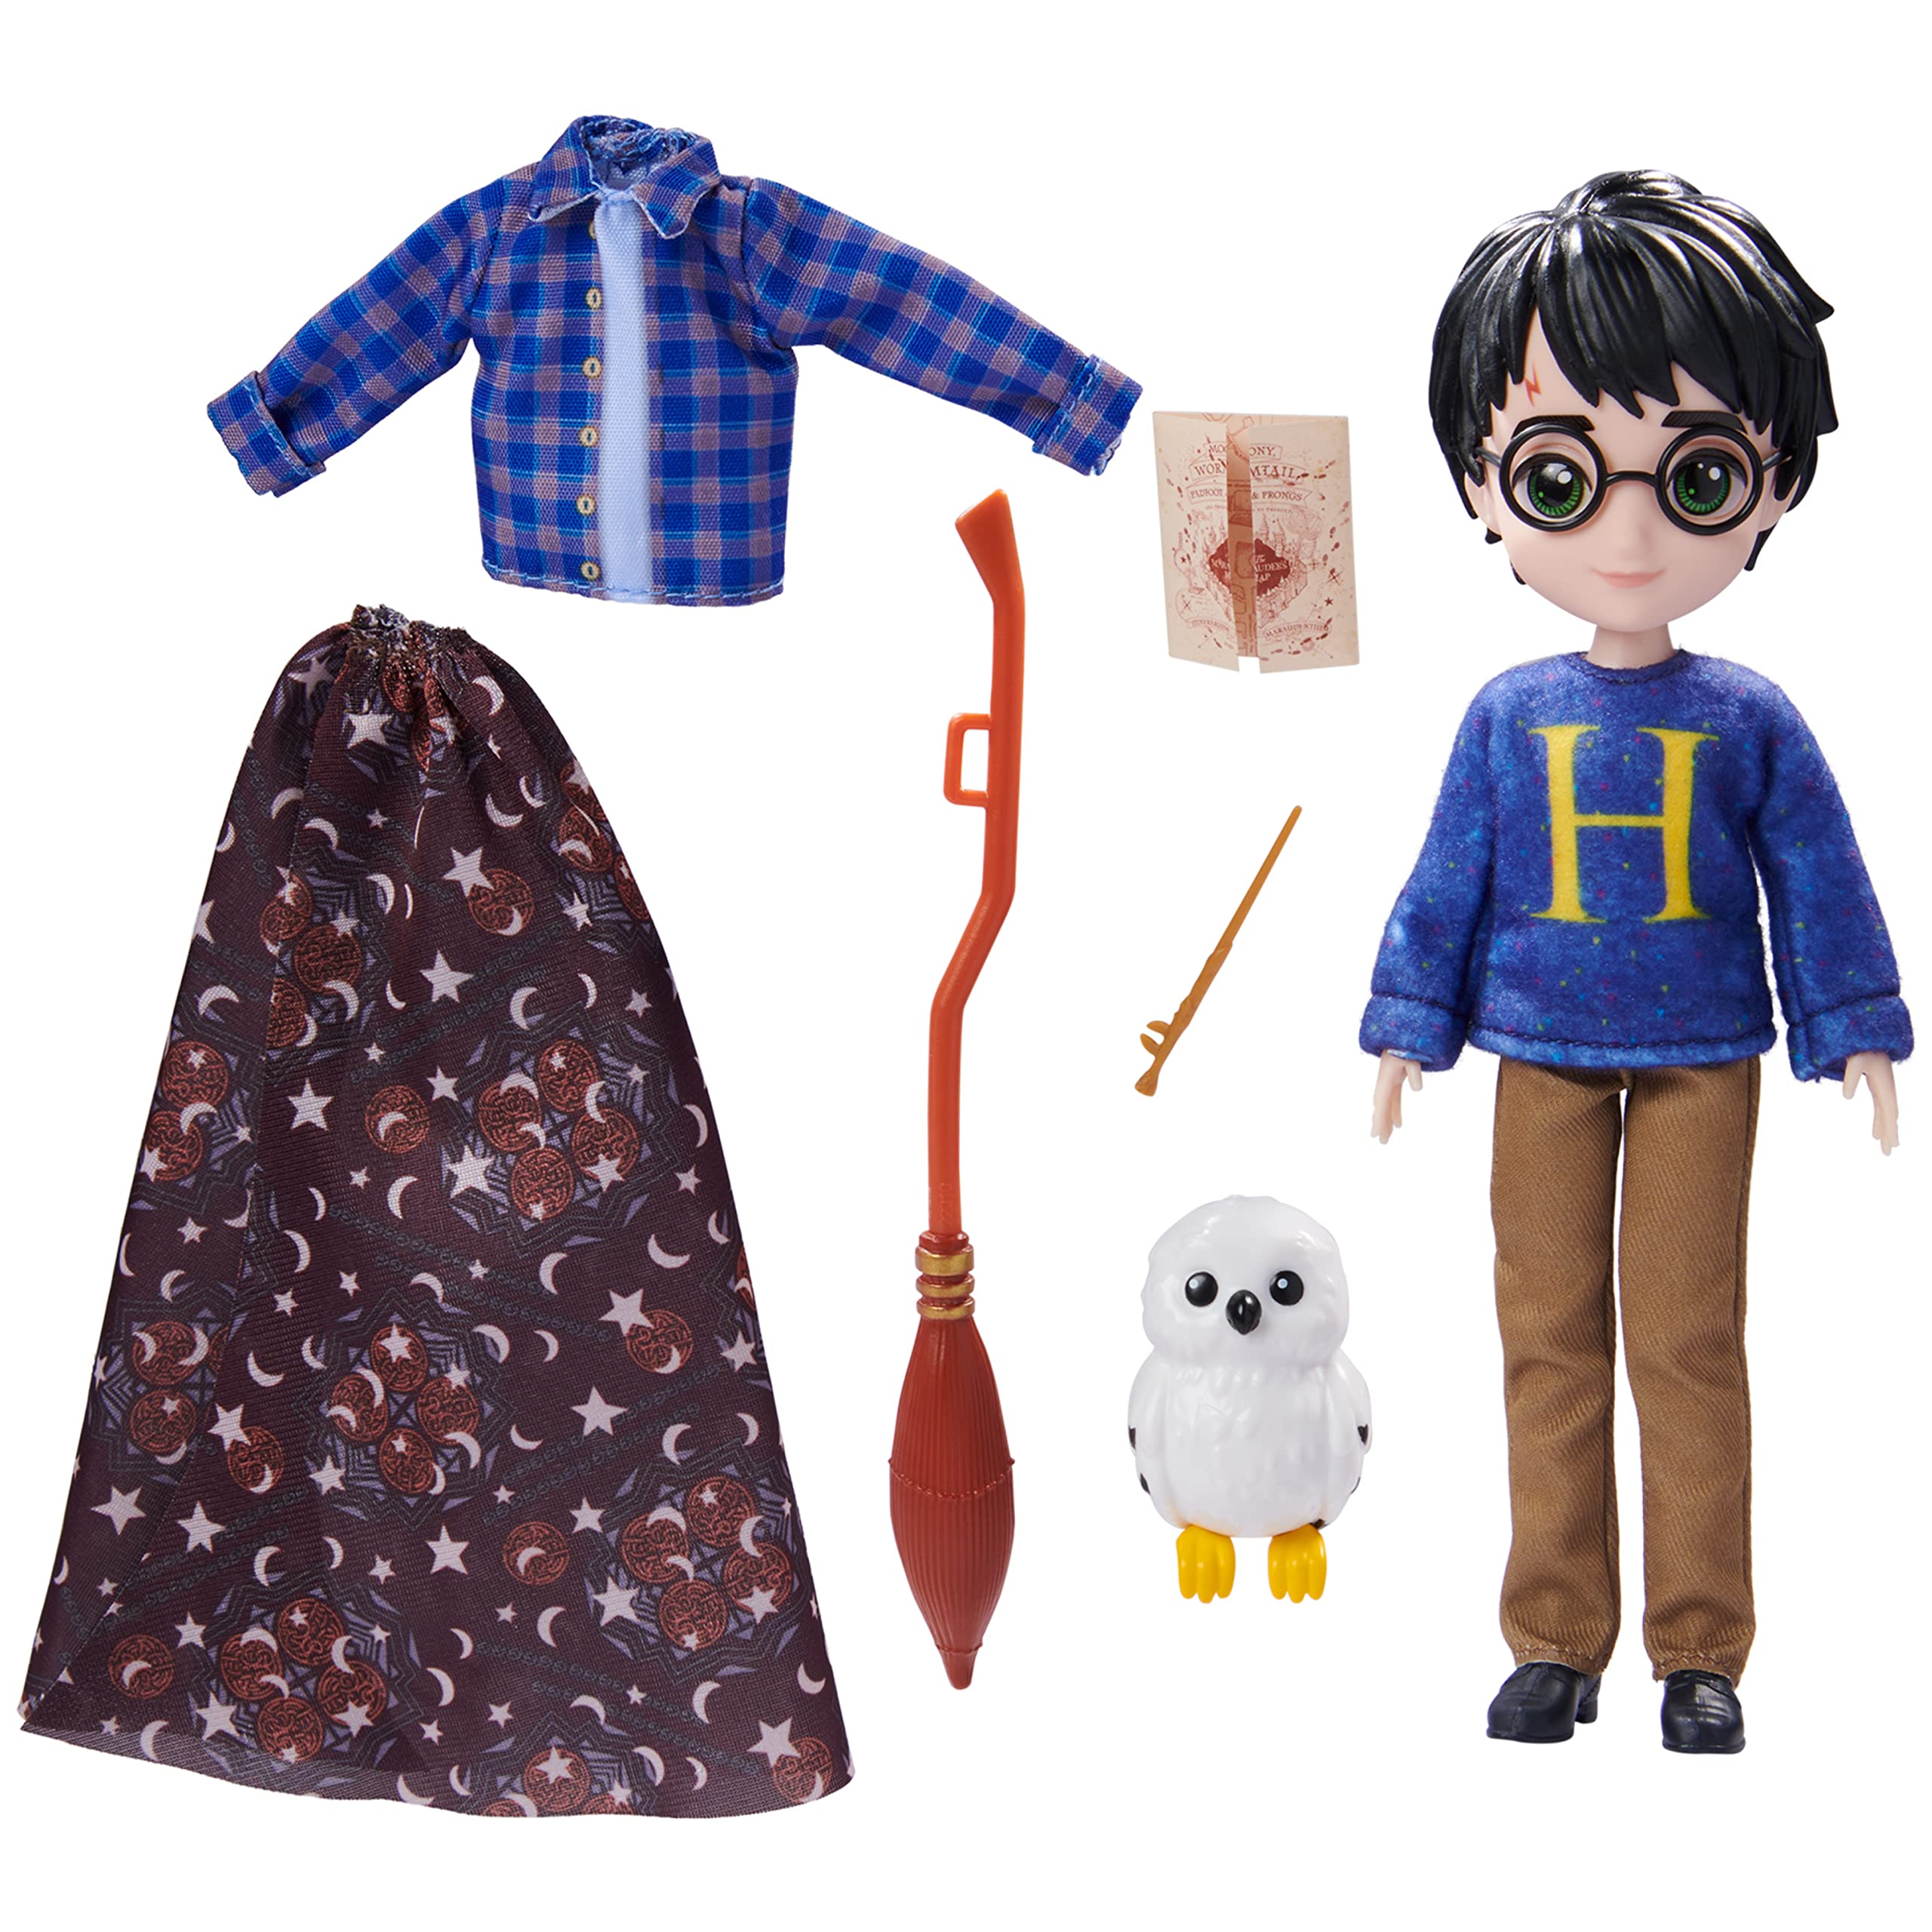 8-inch Harry Potter Doll Gift Set with Invisibility Cloak and 5 Accessories $8 + Free Shipping w/ Prime or on $25+